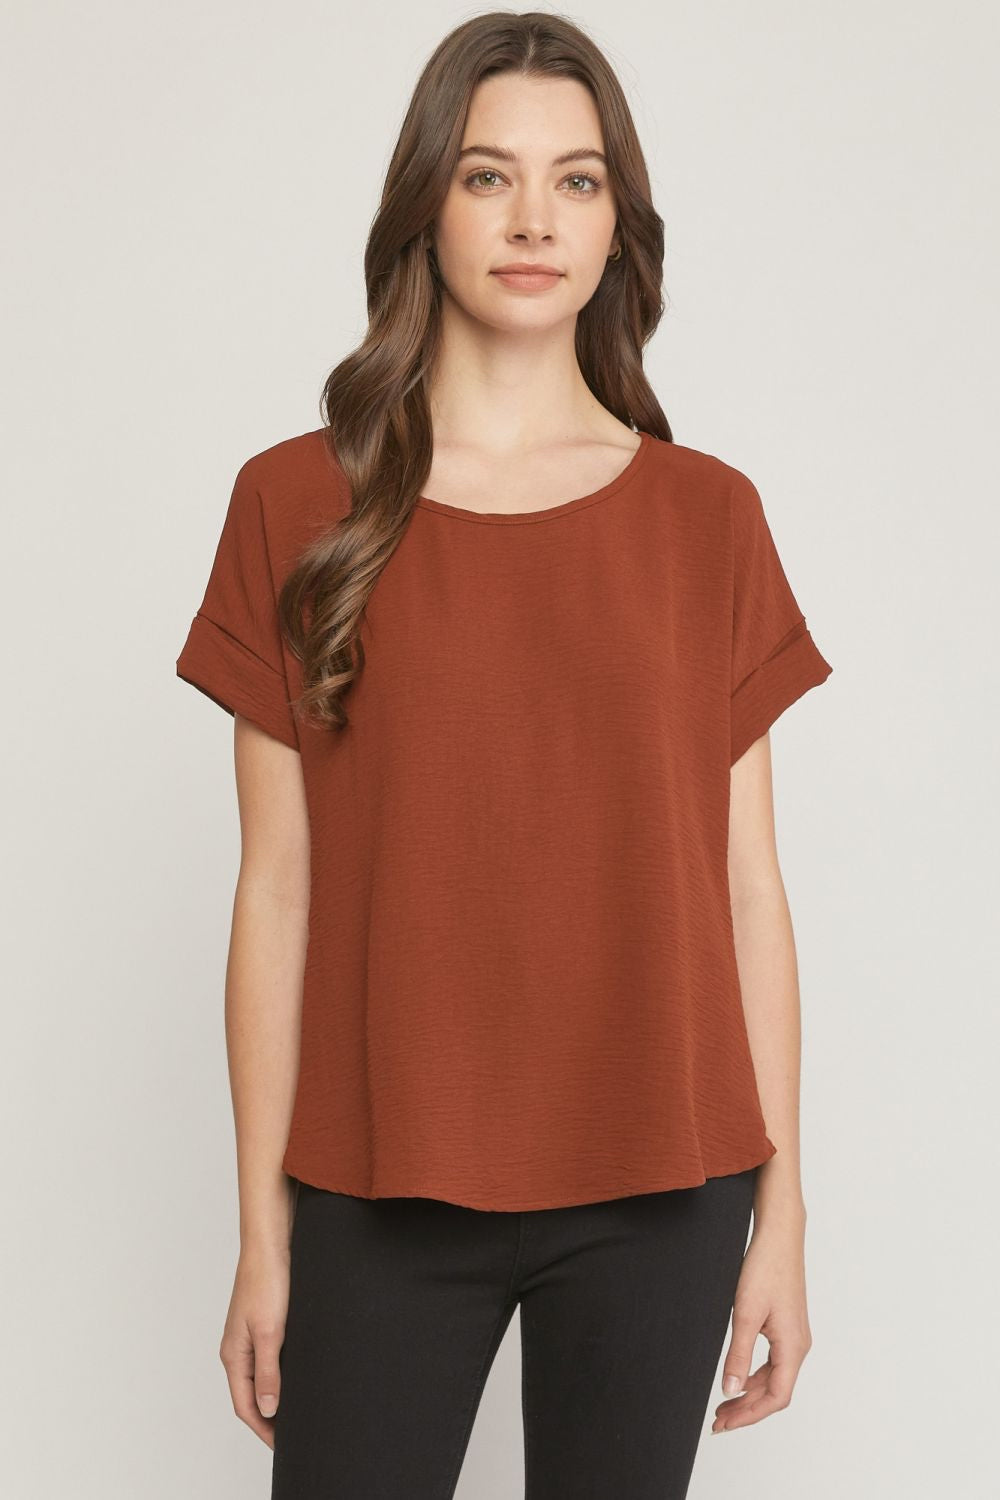 Chocolate scoop-neck top featuring permanent rolled sleeve detail and an asymmetrical hem.